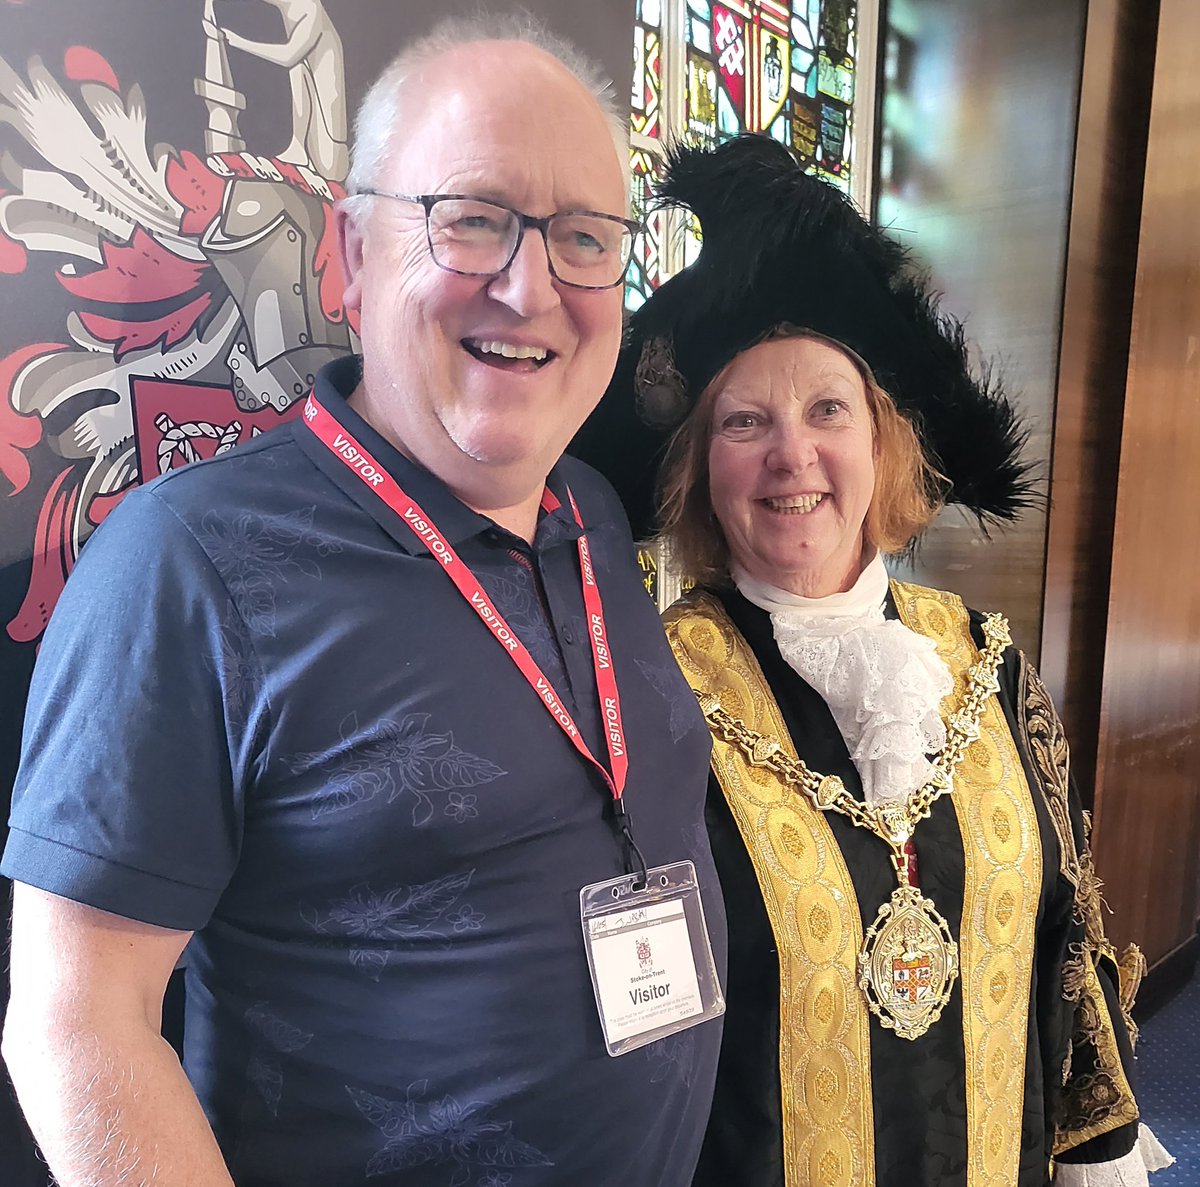 Comparing Lanyards and Pirate hats with the new Mayor Lyn Sharpe.

Best of luck as you take the city into its centenary year...@SoTCityCouncil